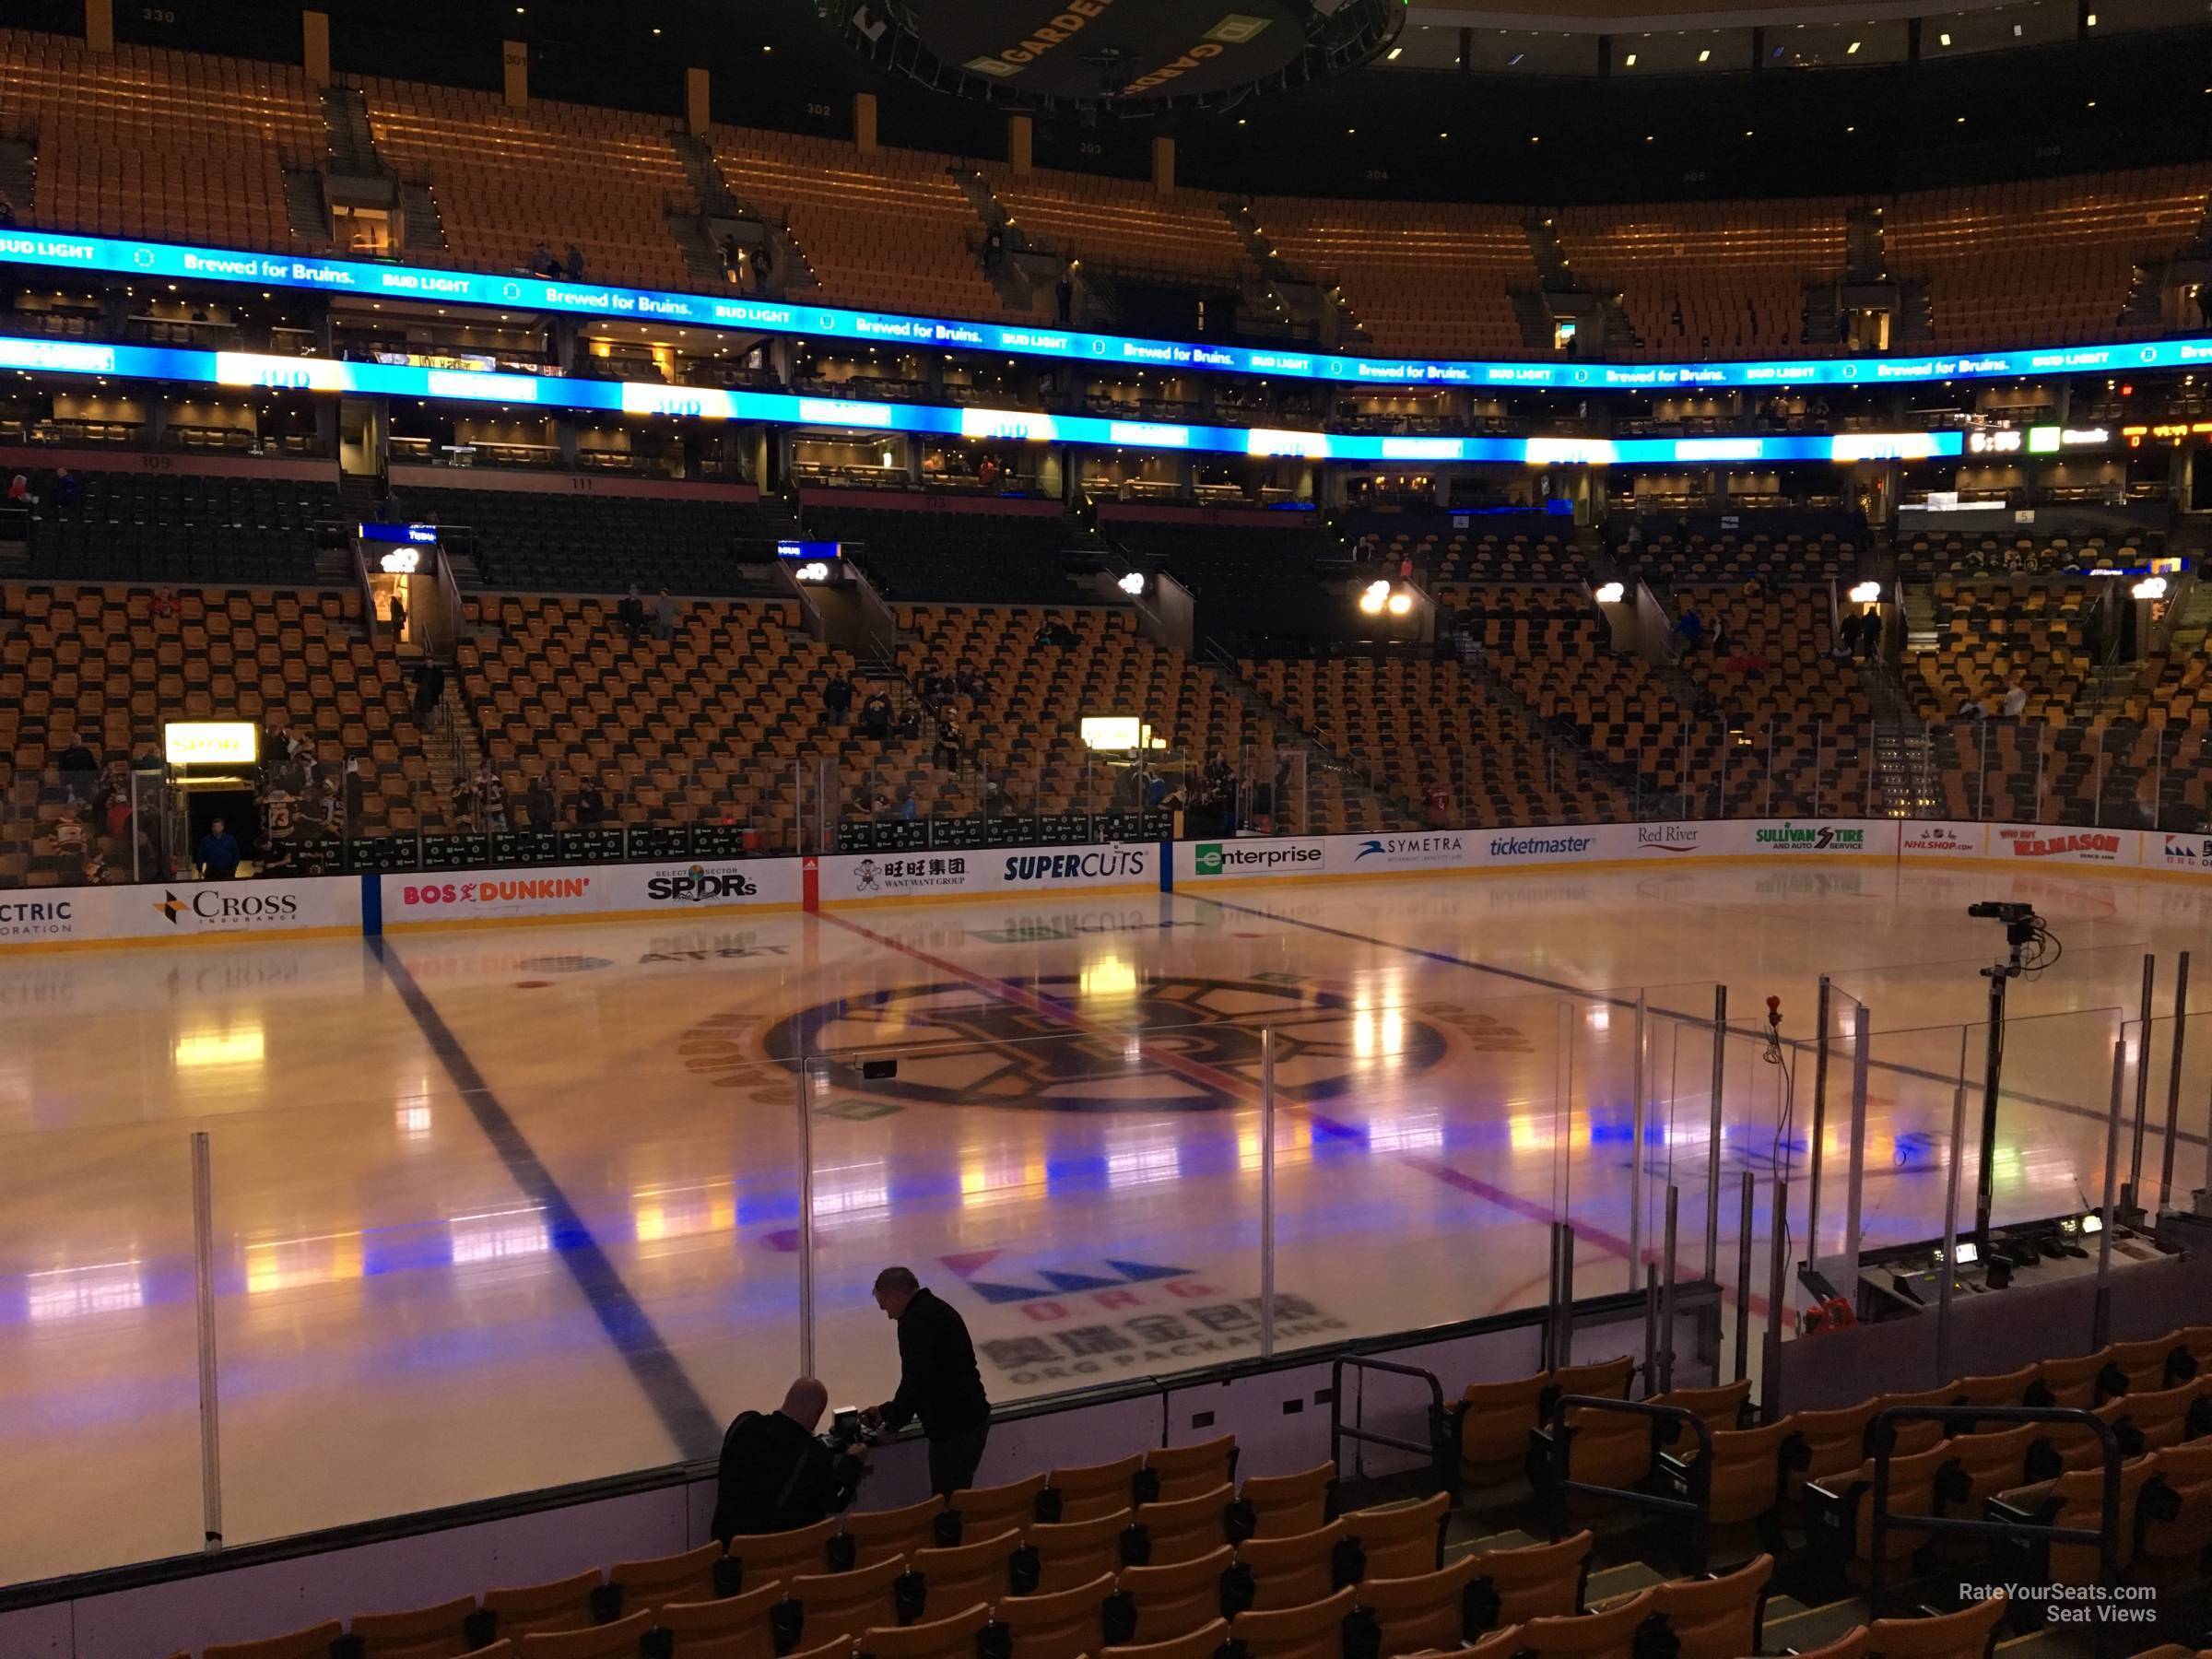 loge 13, row 10 seat view  for hockey - td garden